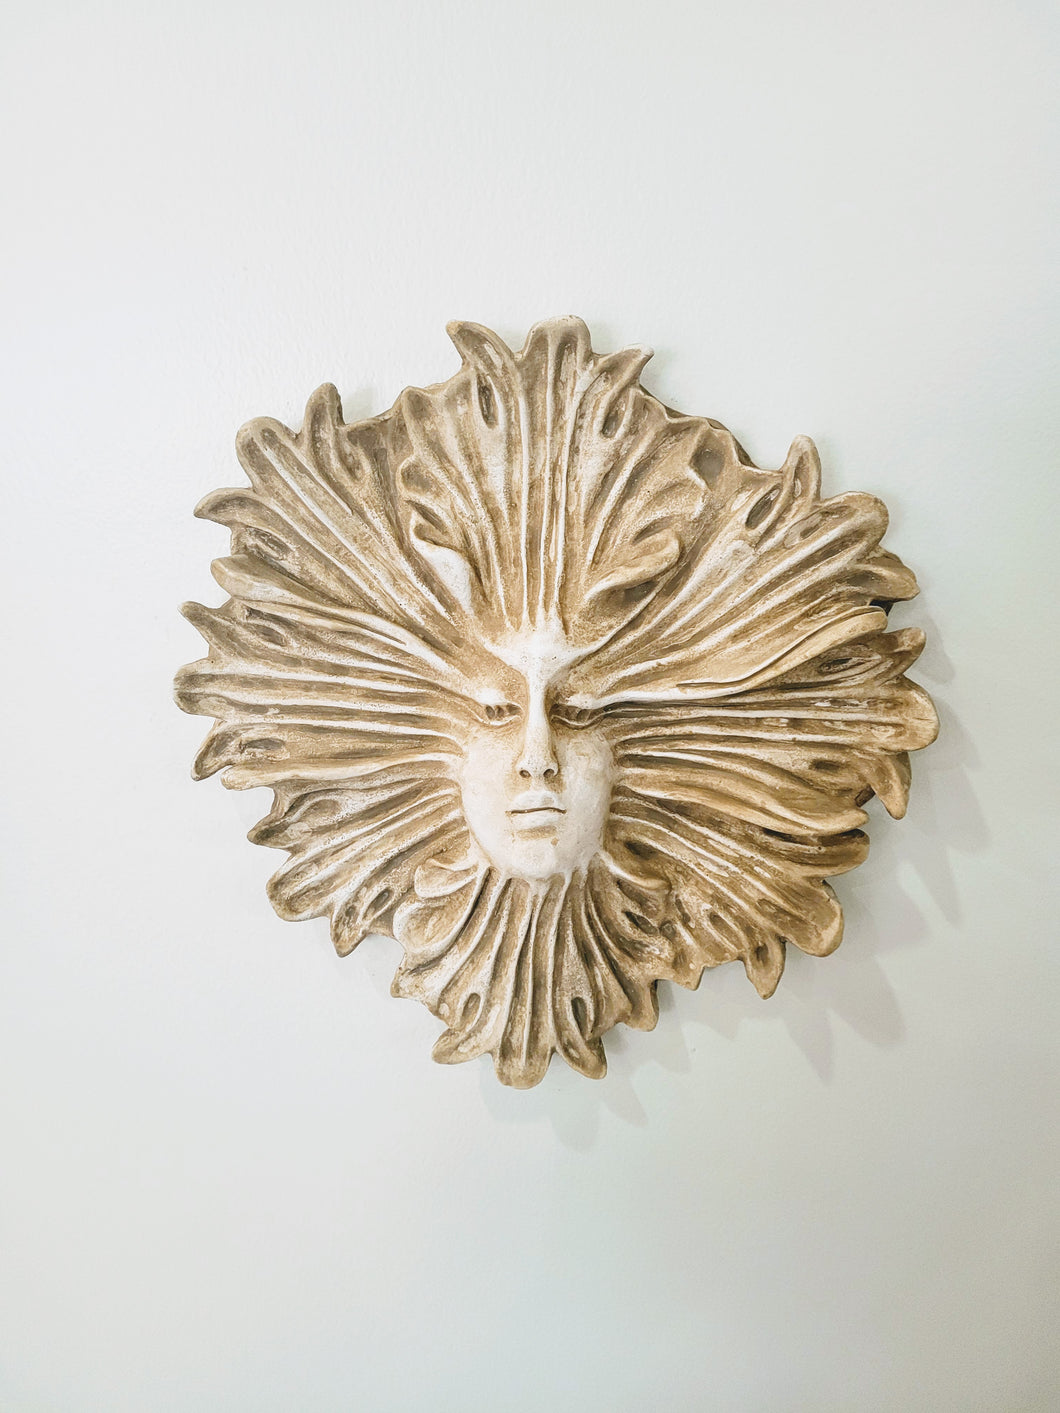 Dryad Leaf Green Woman Face Wall Sculpture #10060